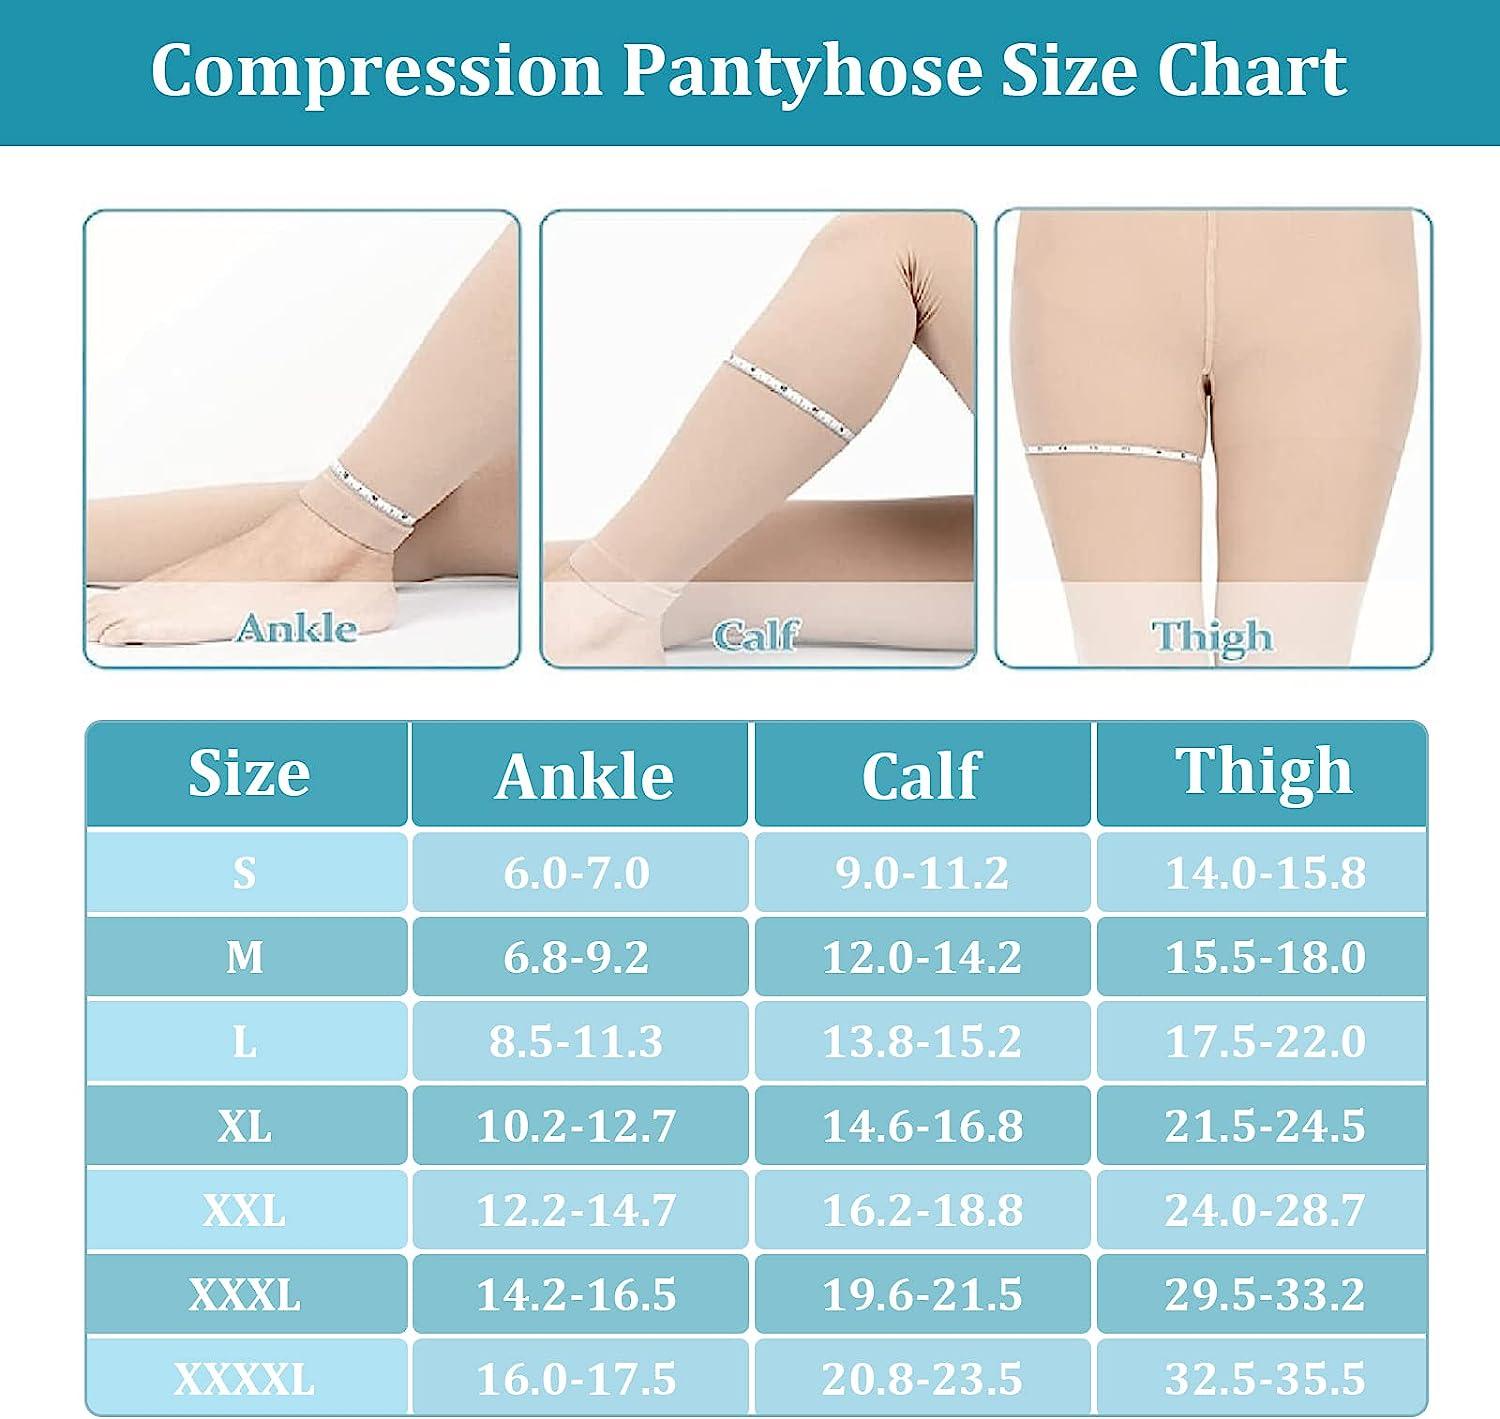  15-20mmHg Womens Footless Compression Pantyhose